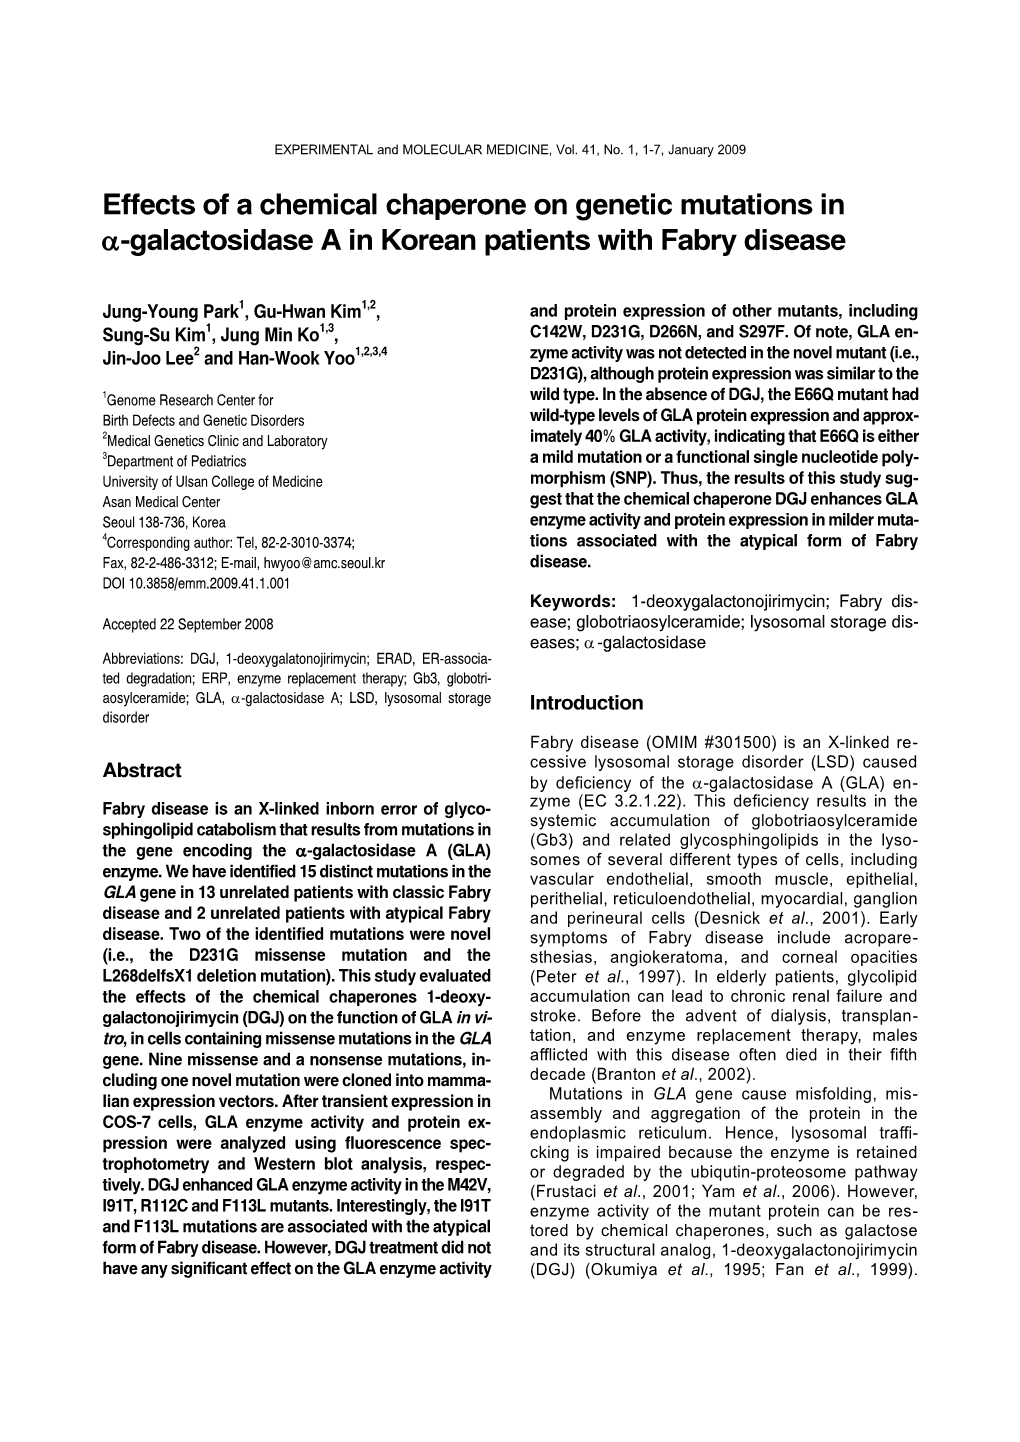 Effects of a Chemical Chaperone on Genetic Mutations in Α-Galactosidase a in Korean Patients with Fabry Disease